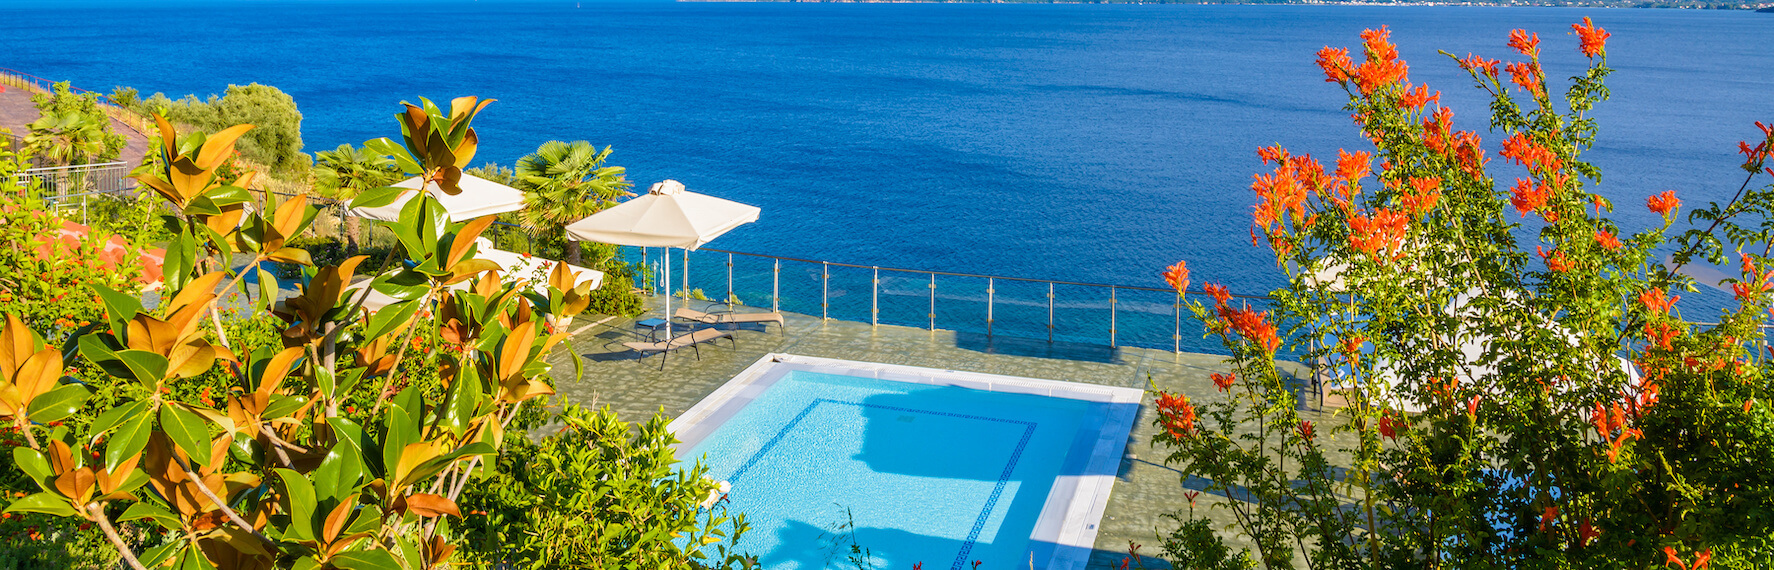 Immerse yourself in luxury with villa rentals in Kefalonia, Greece. Discover exquisite accommodations featuring stunning architecture, private pools, and breathtaking views. Experience the perfect blend of comfort and elegance as you create unforgettable memories in these idyllic vacation retreats.